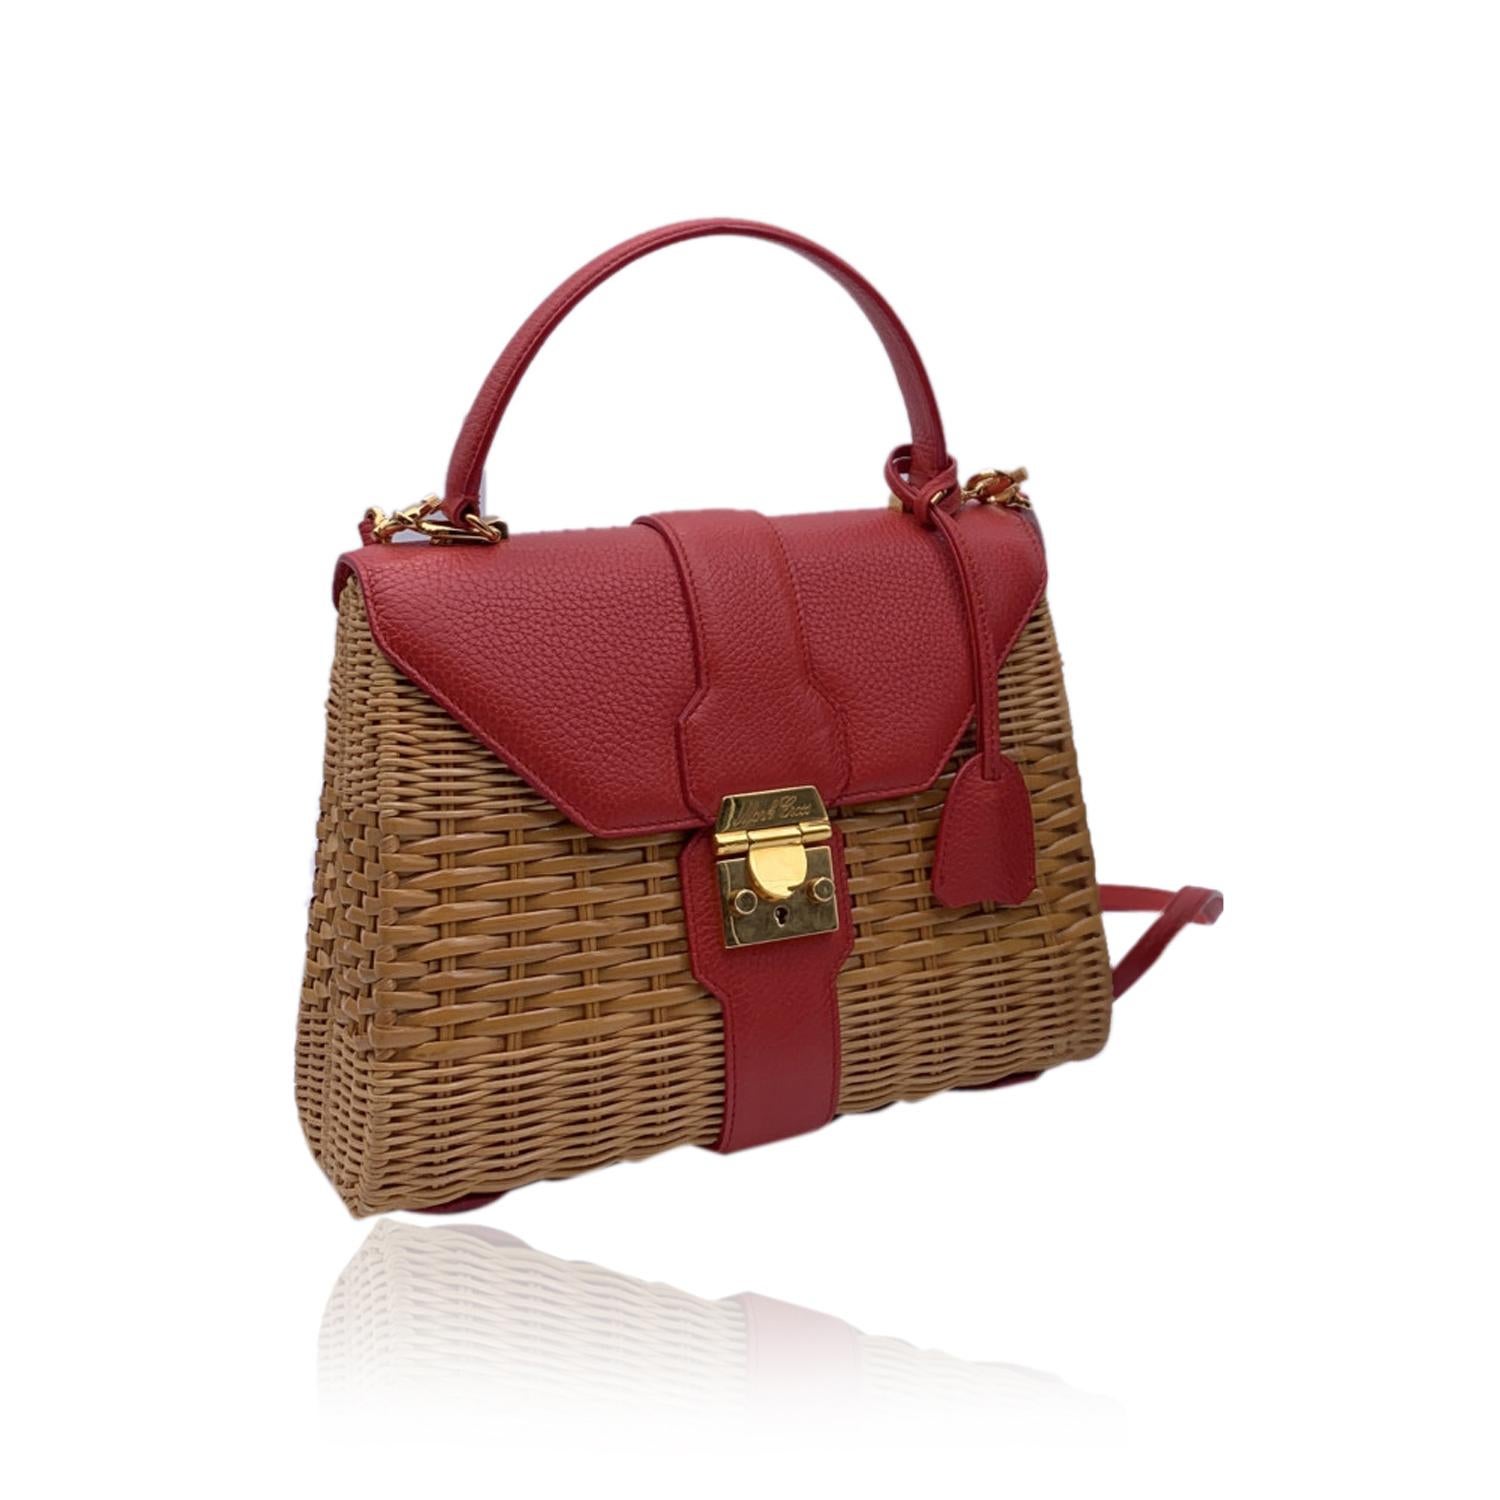 Mark Cross handwoven wicker/rattan satchel detailed with and leather satchel. Flap with push-lock closure. Adjustable and removable shoulder strap. Red fabric lining. Single interior slip and zip pocket. Gold-plated brass